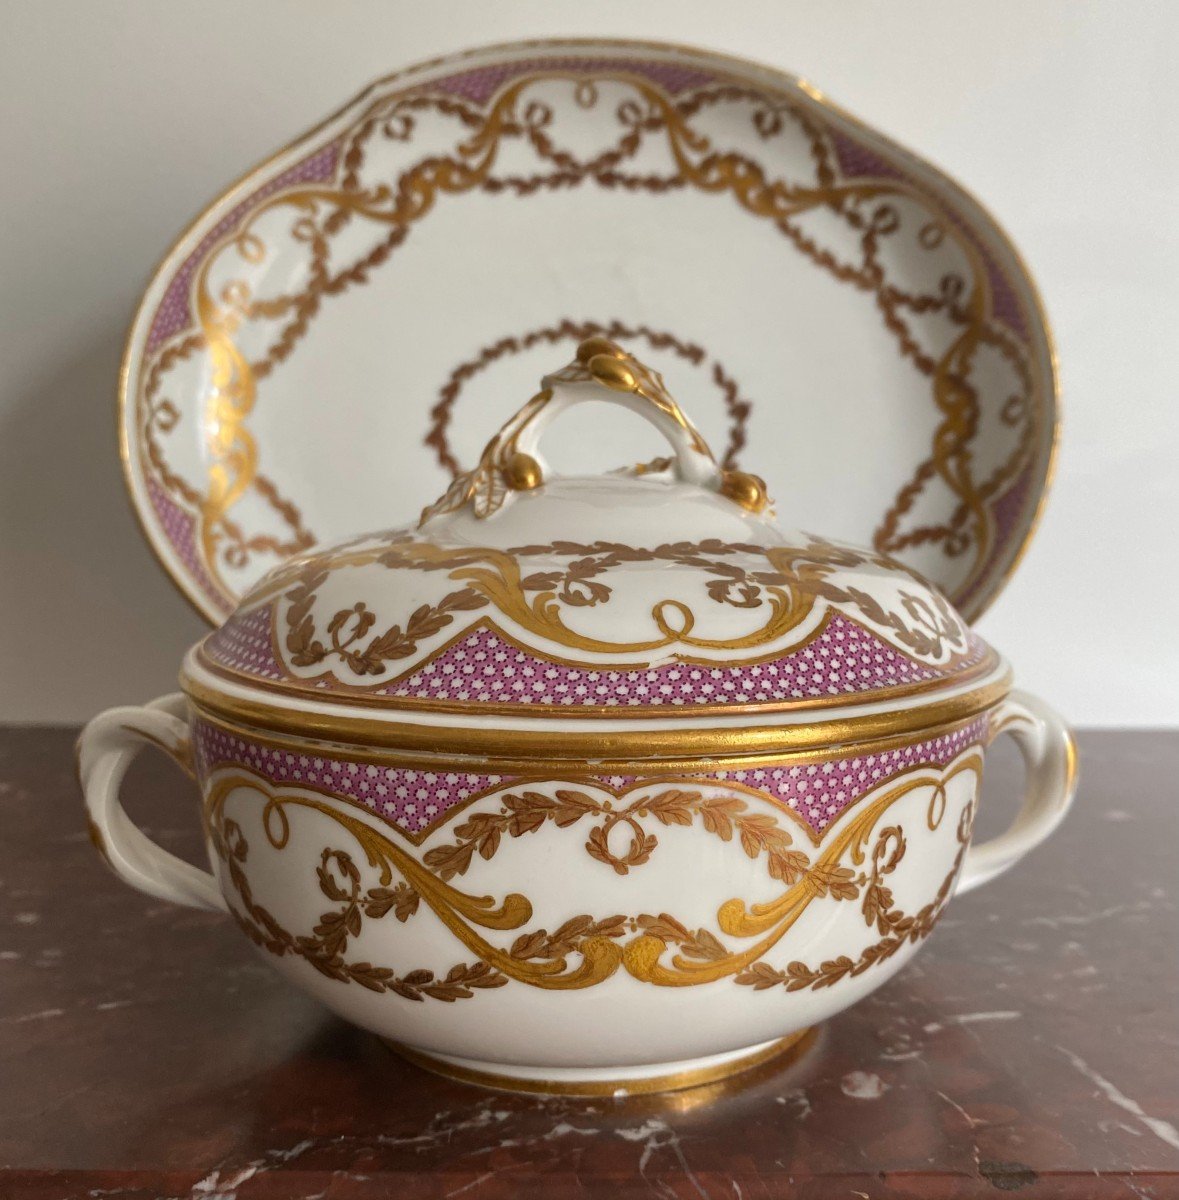 Manufacture Royale De Sèvres - Covered Bowl And Its Tray In Hard Porcelain - Taillandier Base - 2nd Size 